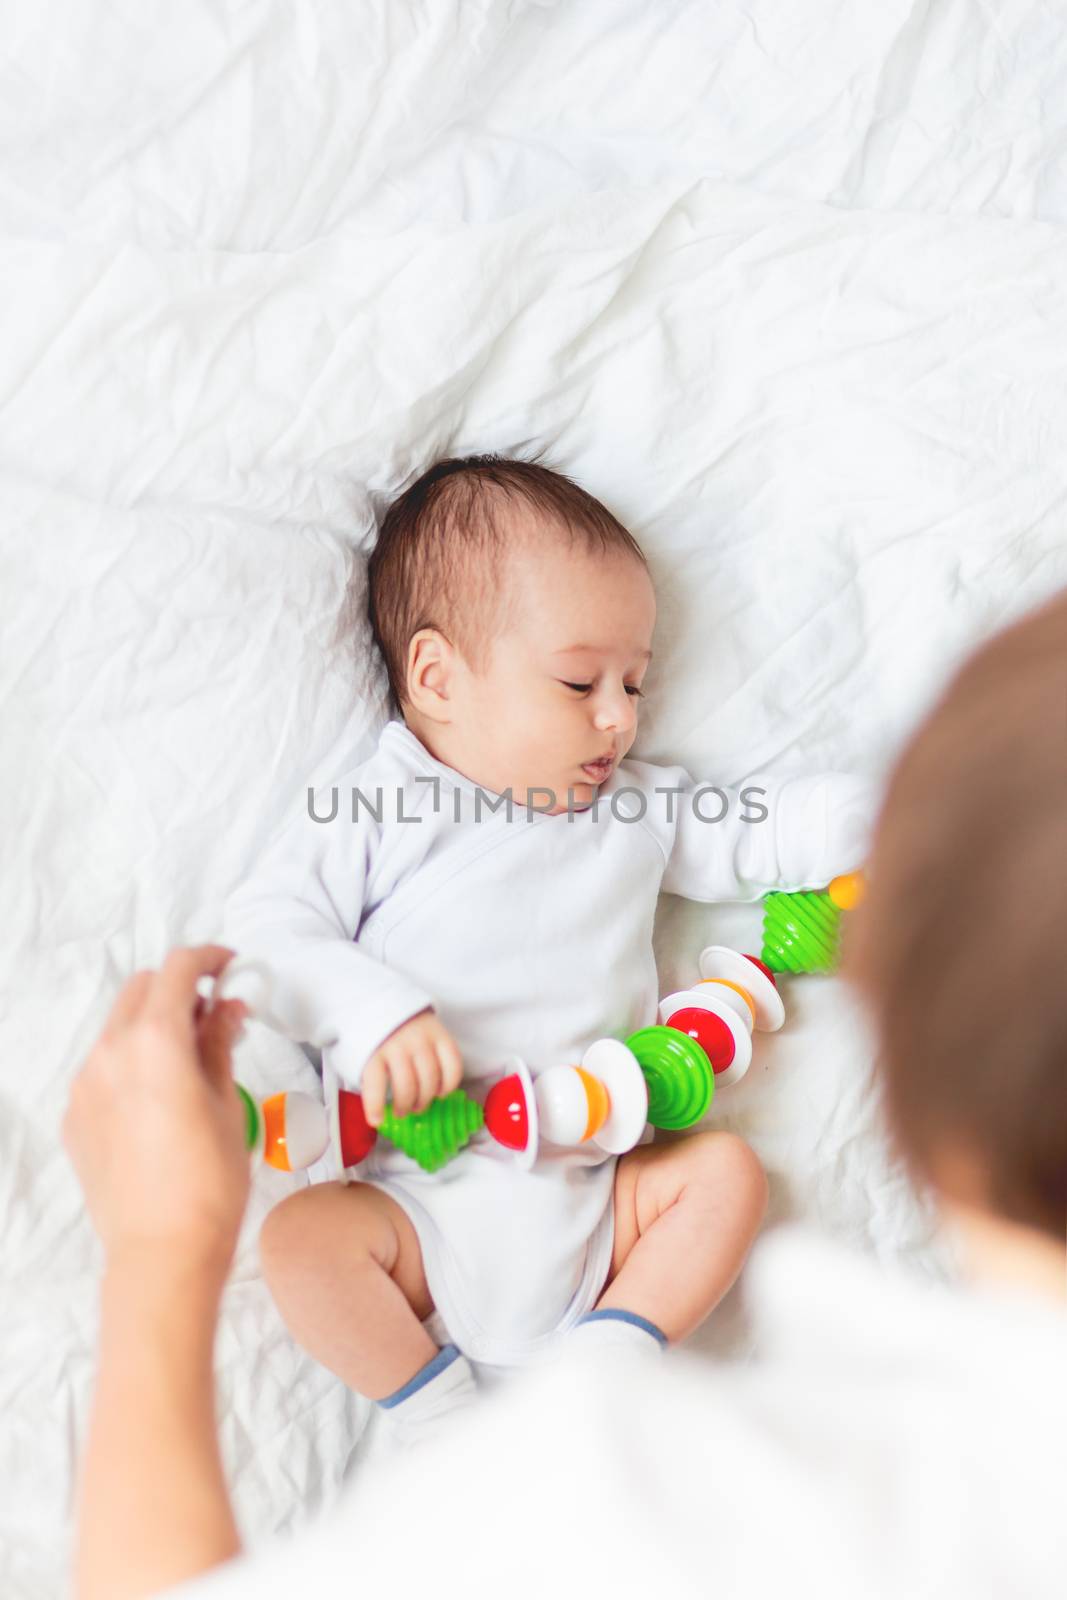 Woman plays with newborn boy. Baby's first toy - colorful rattle by aksenovko